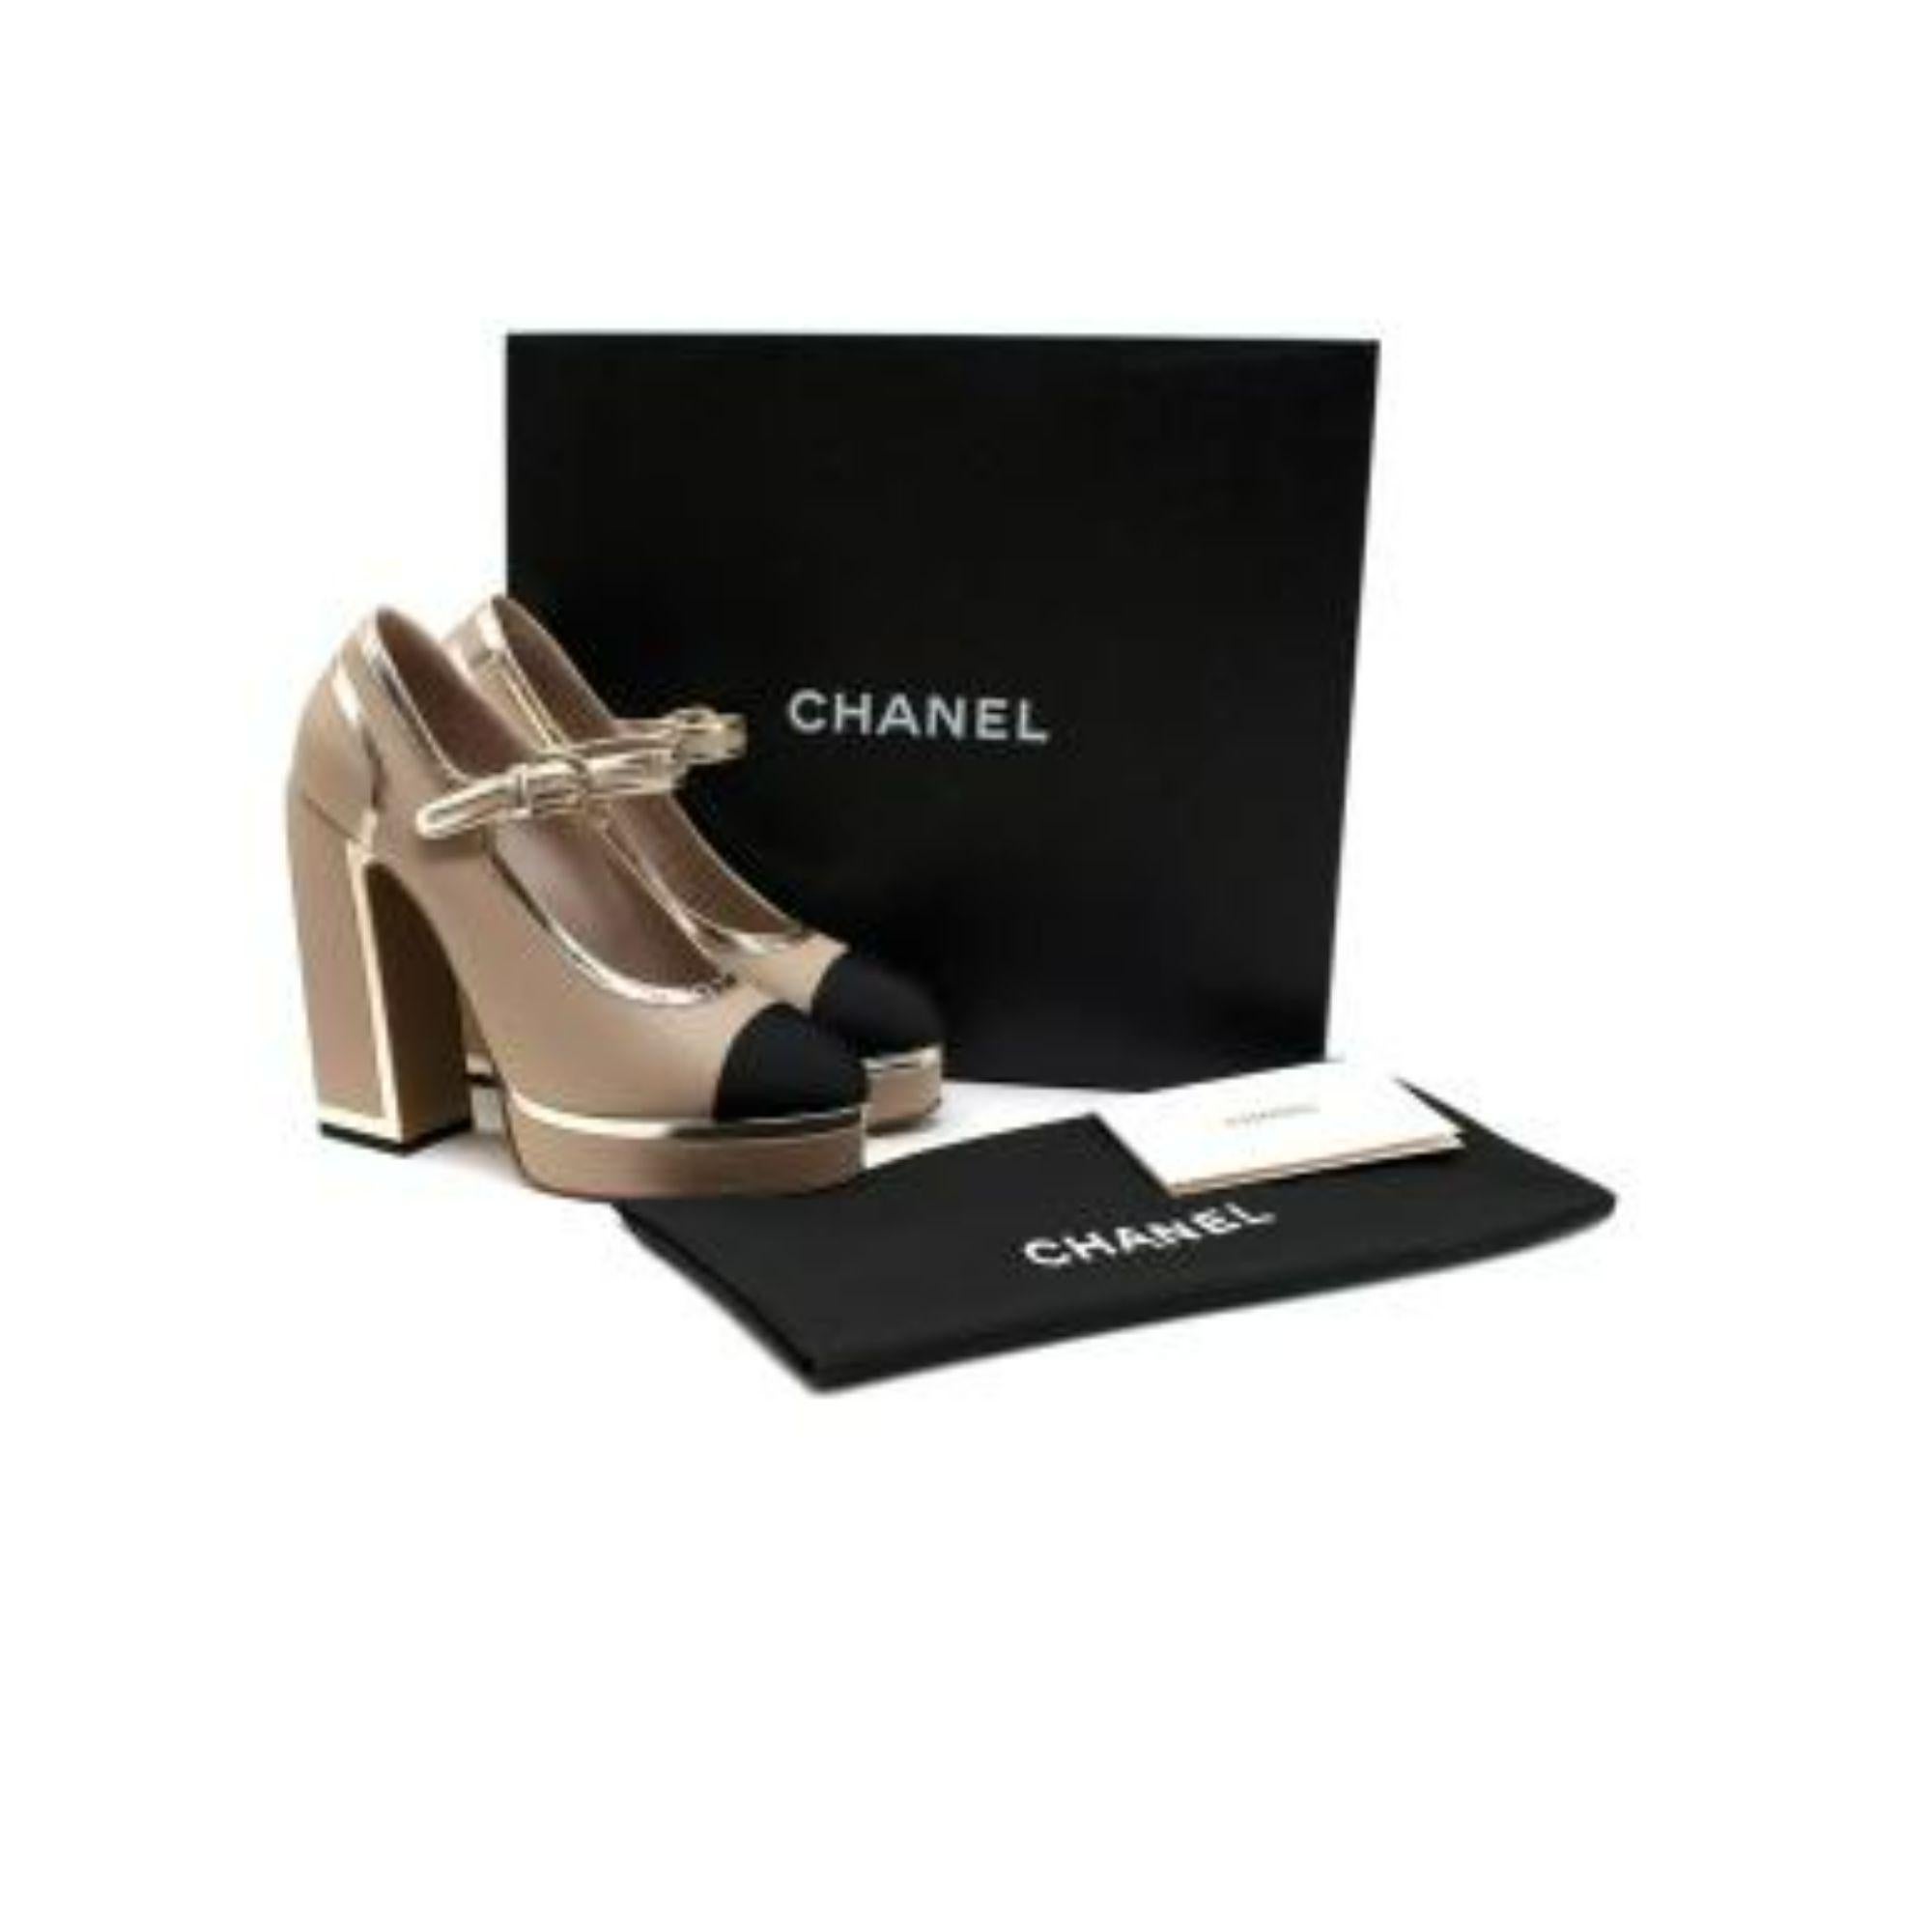 Chanel Greige Lambskin Platform Mary Jane Pumps

Winter 2019 collection
Beautiful greige colour
chunky sculpted heel
metallic gold trim
mary jane style
platform
grosgrain cap toe

PLEASE NOTE, THESE ITEMS ARE PRE-OWNED AND MAY SHOW SIGNS OF BEING